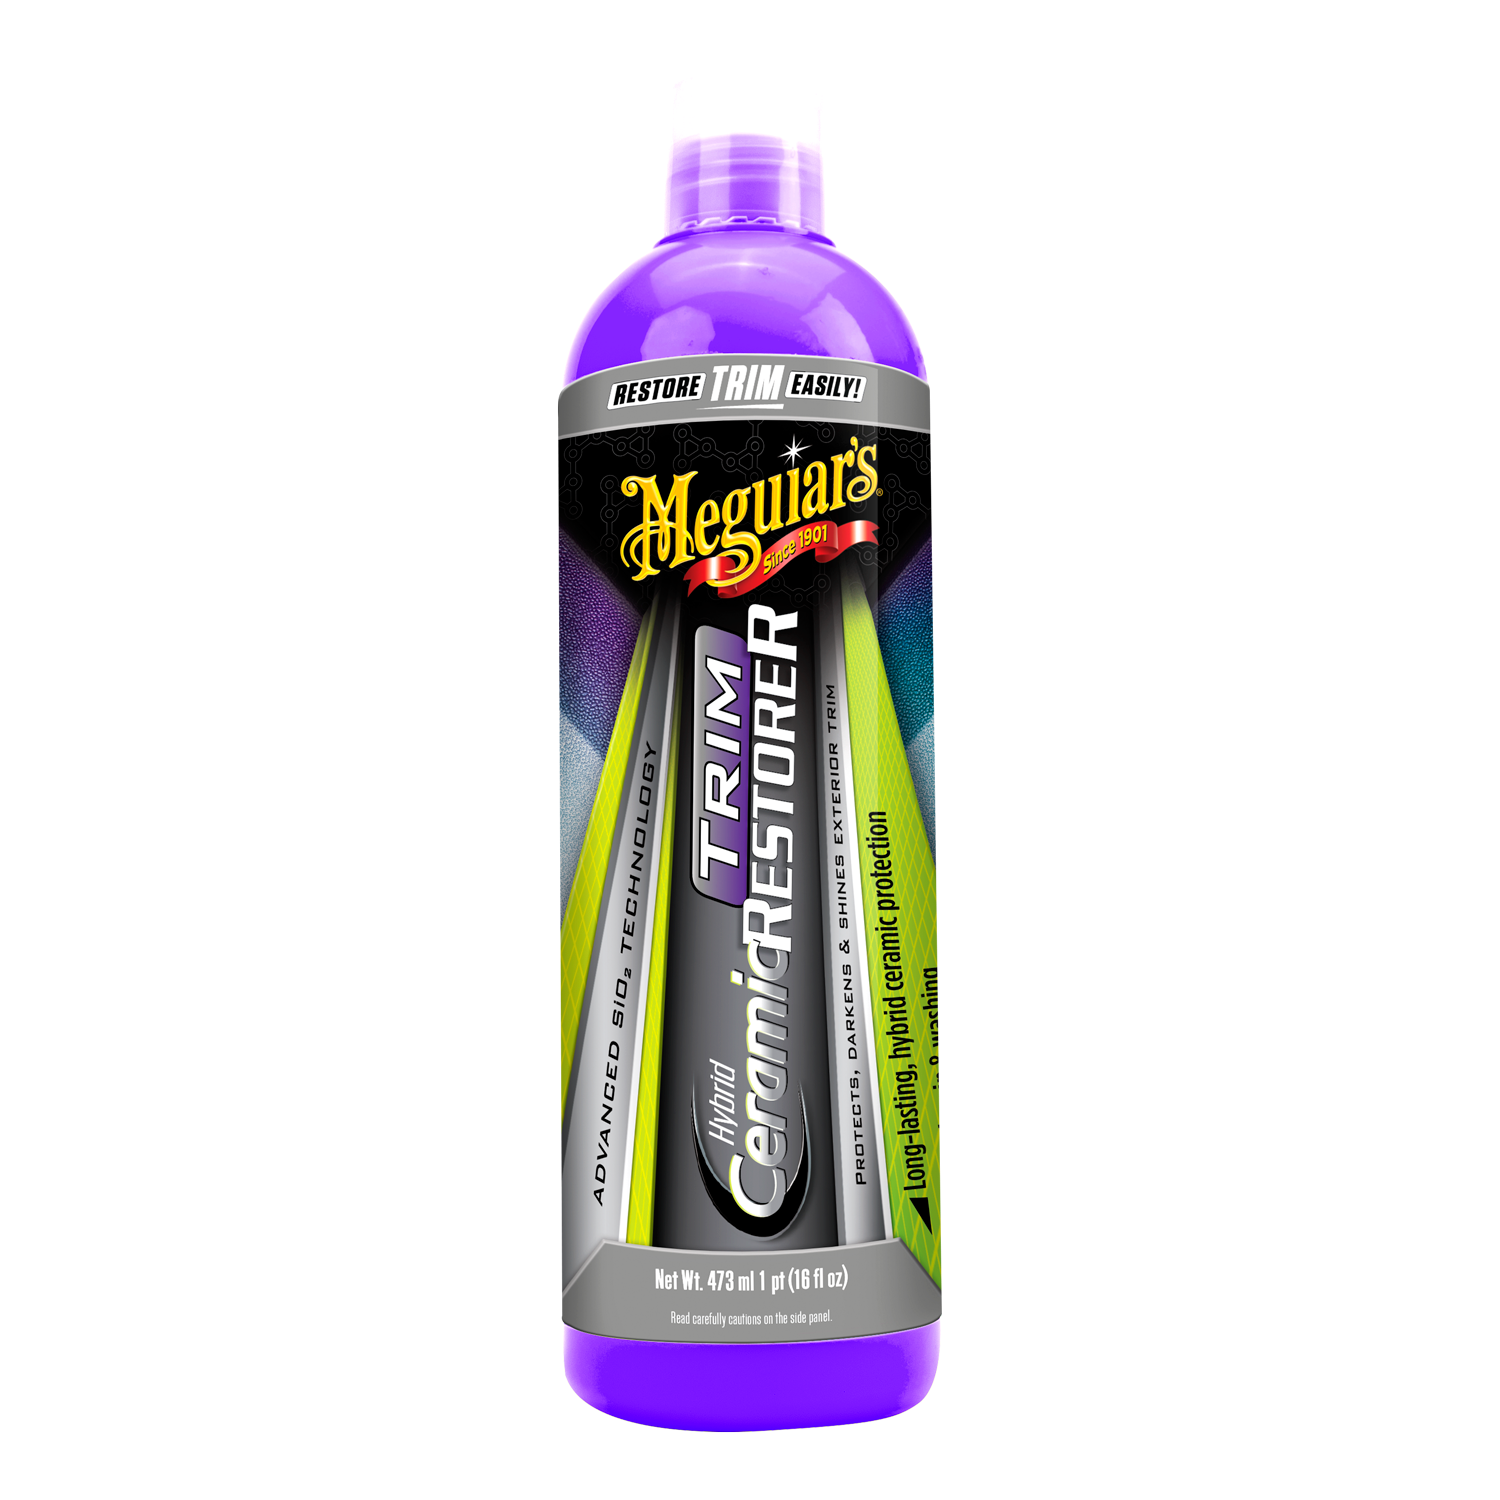 Meguiar's - So, what all have you applied our new Hybrid